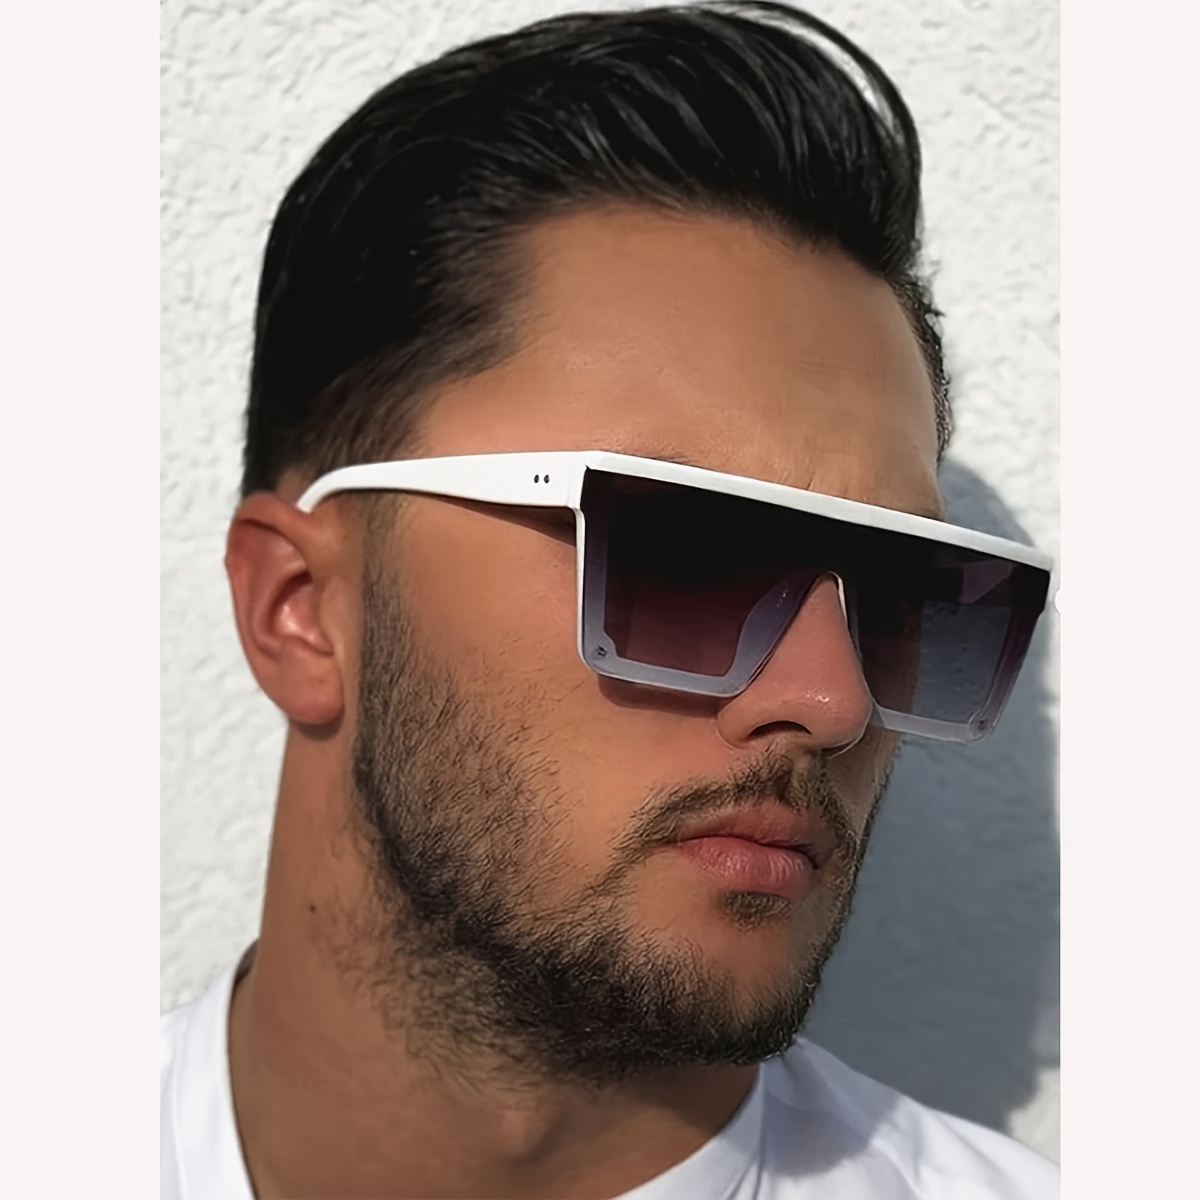 

Cyberpunk Cool White Flat Top One-piece Square Fashion Glasses, For Men Women Outdoor Sports Party Vacation Travel Driving Fishing Supply Photo Prop